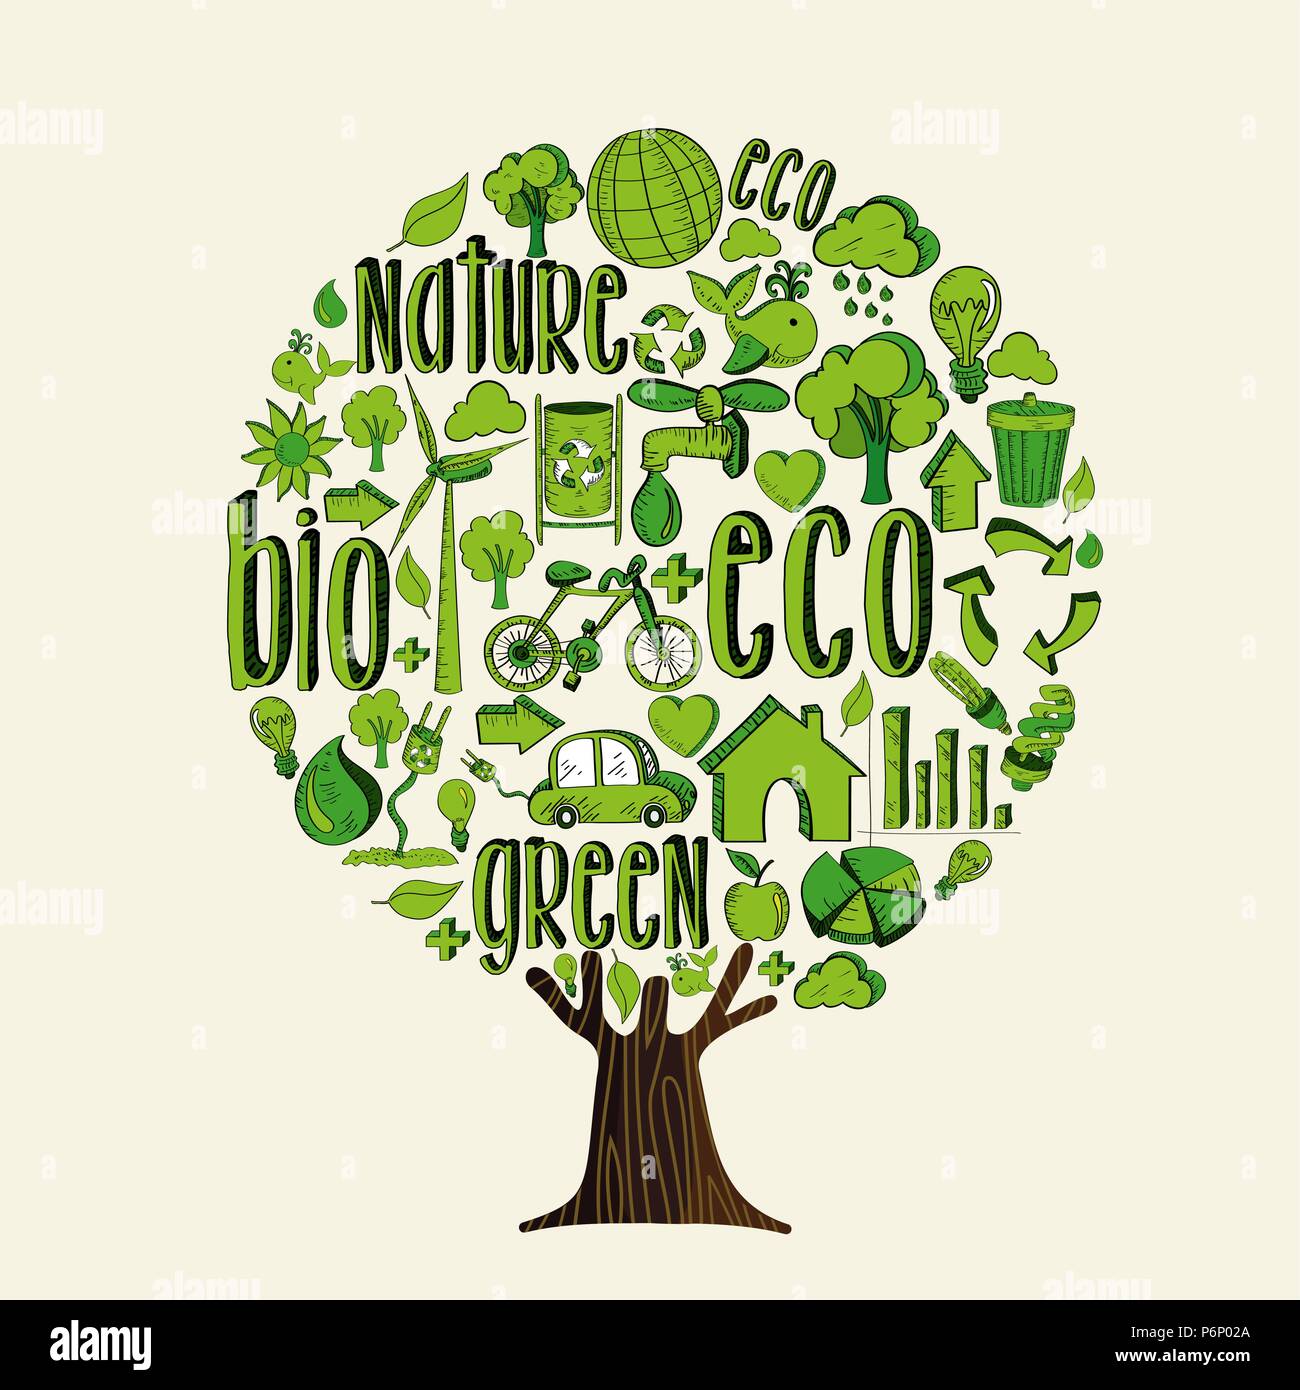 Tree made of eco friendly icons and symbols, think green concept. Environment help illustration for planet conservation. EPS10 vector. Stock Vector